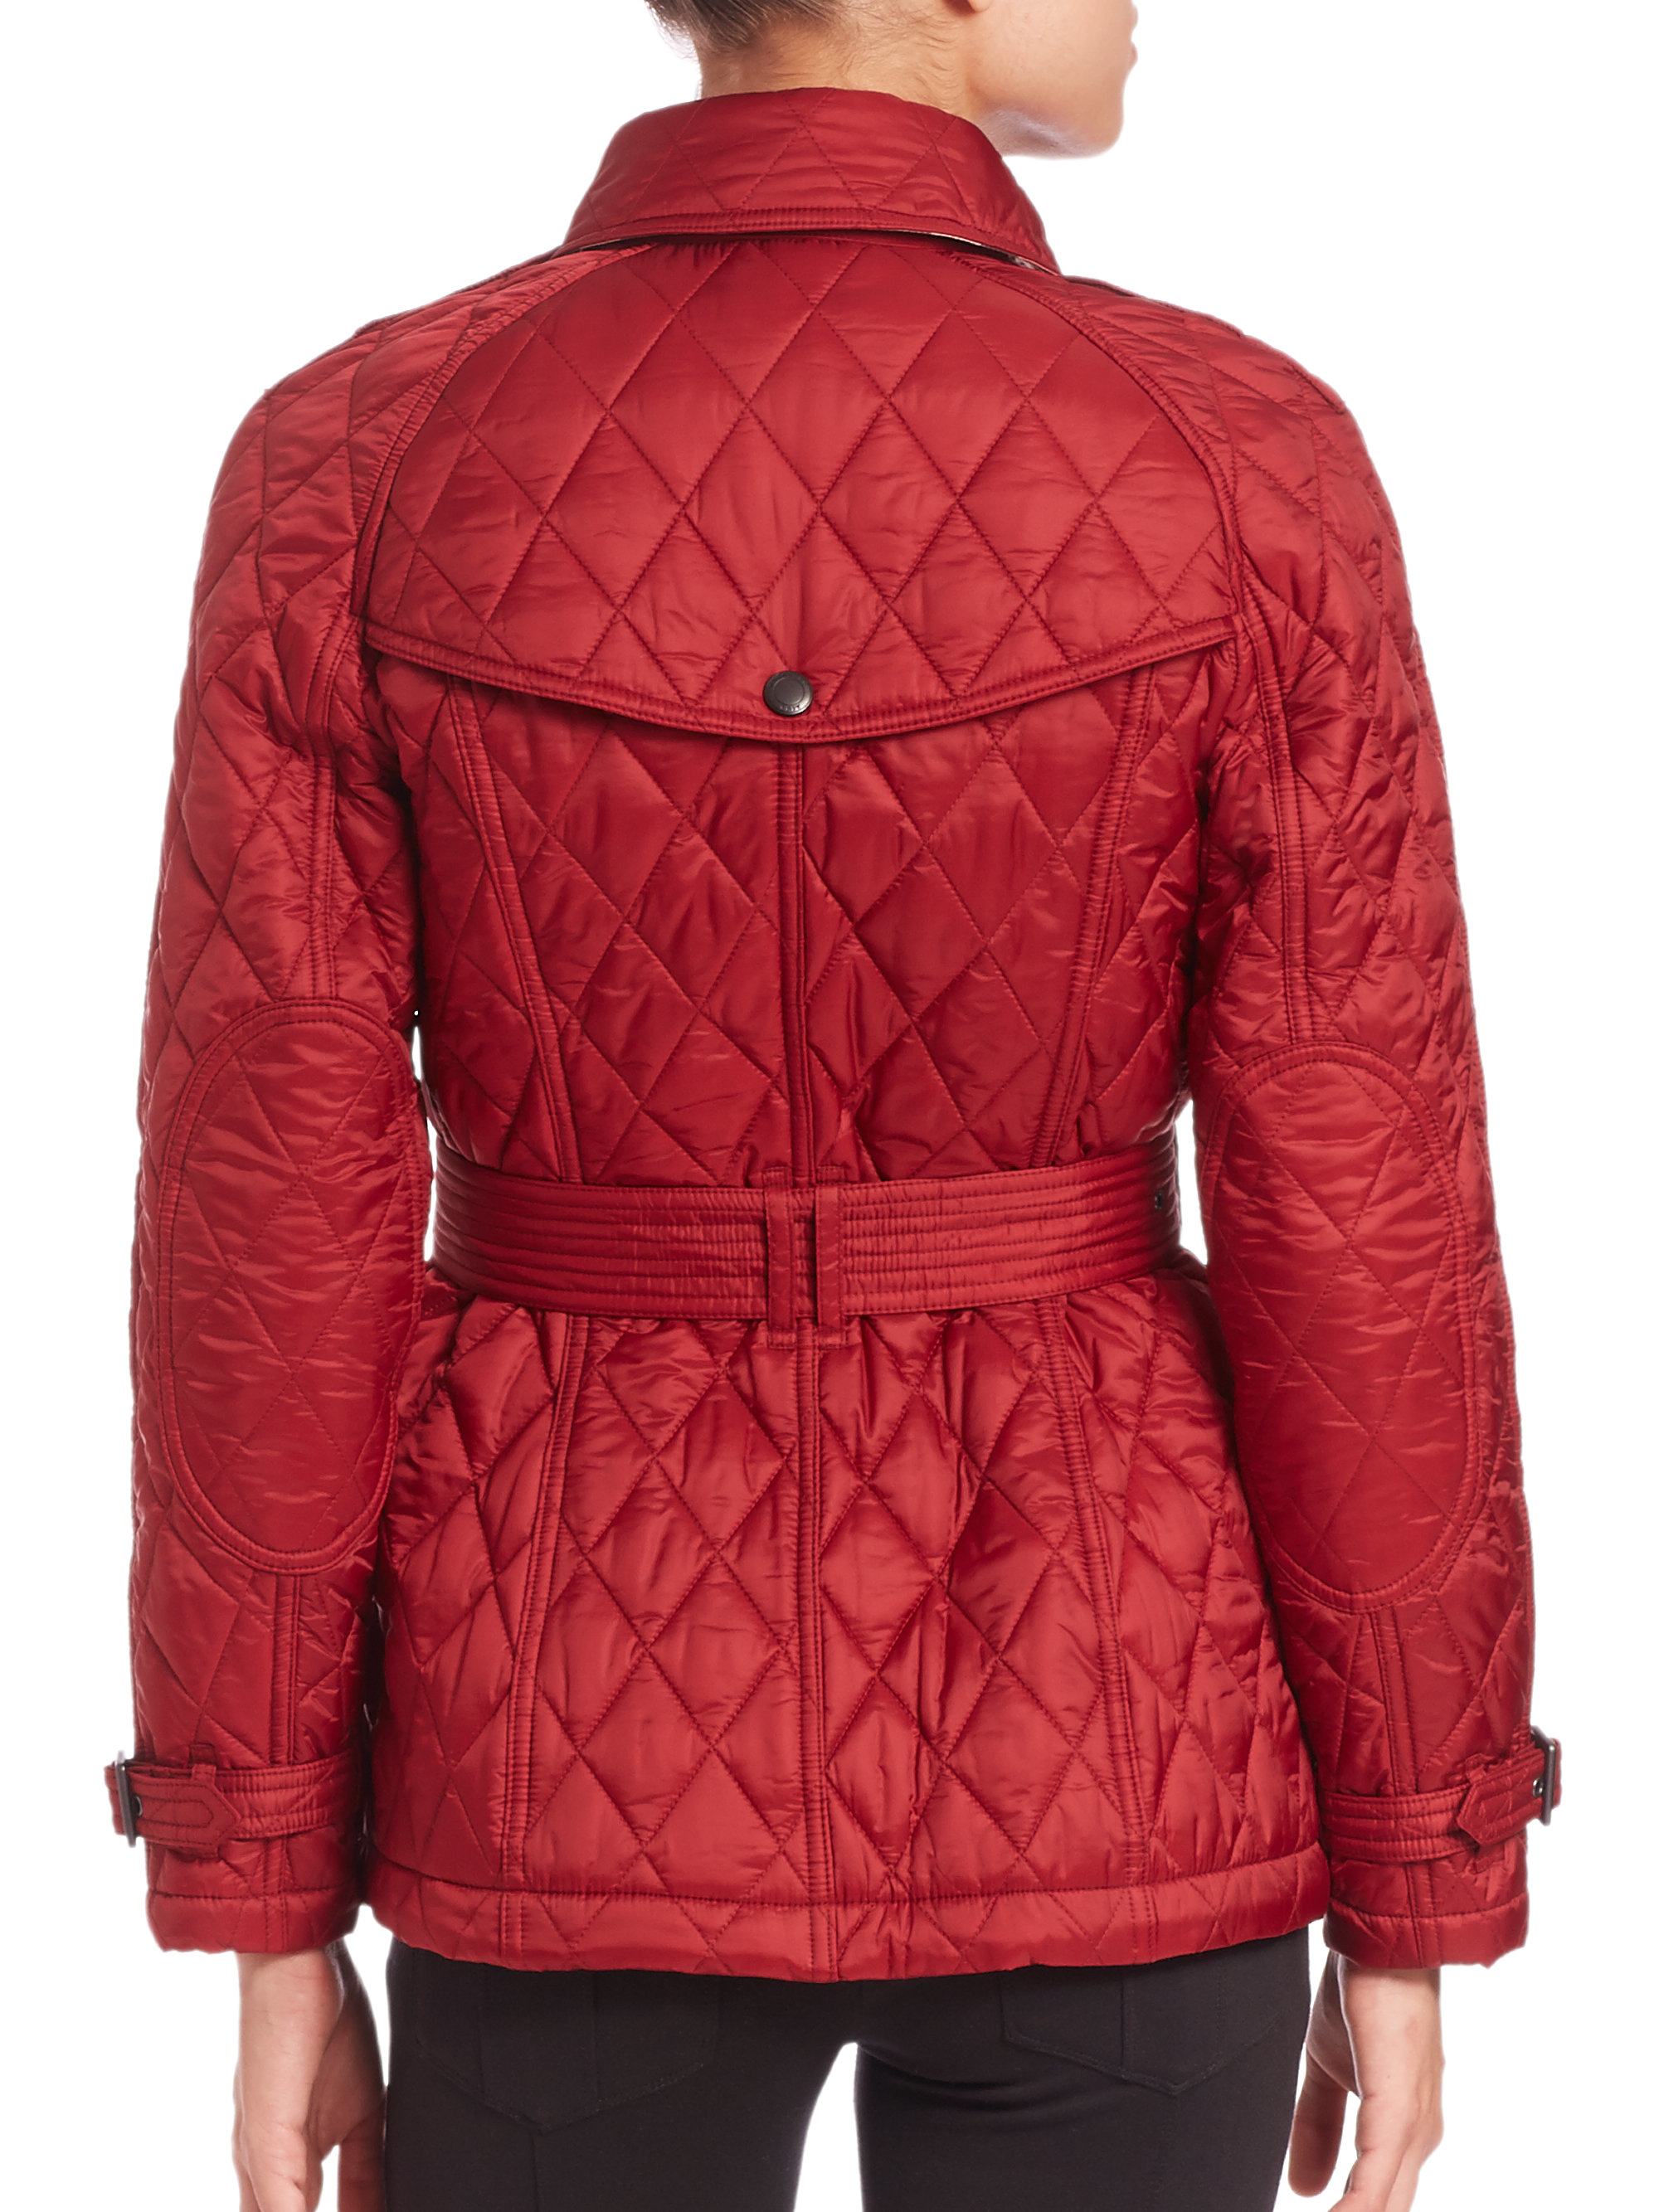 Lyst - Burberry Brit Finsbridge Short Quilted Jacket in Red